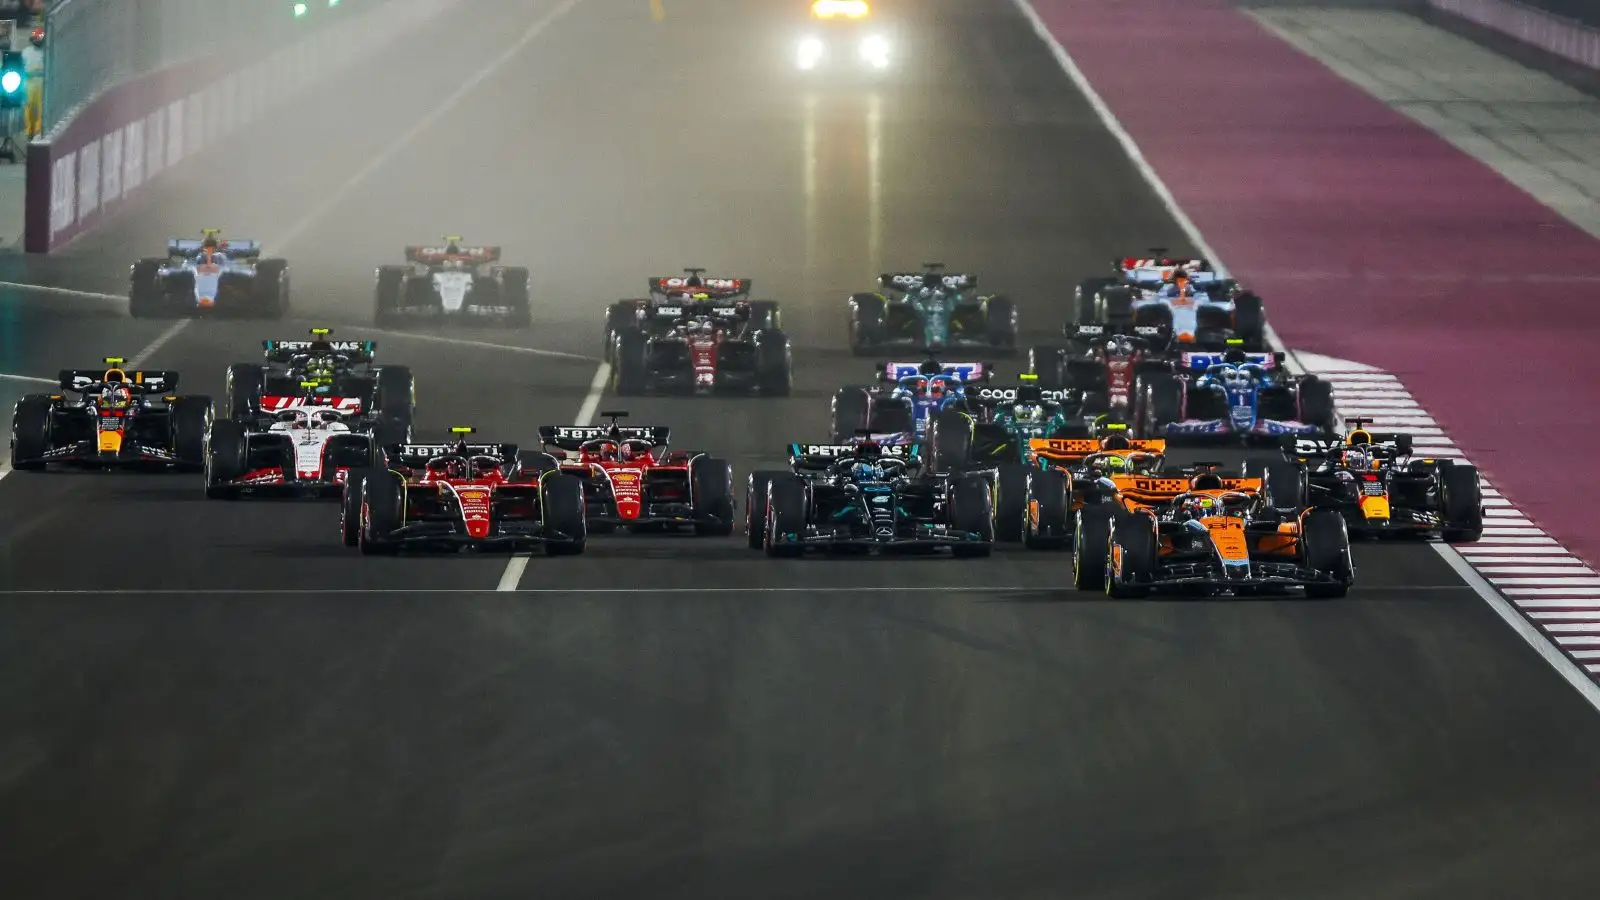 McLaren driver Oscar Piastri leads the field at the start of the Qatar Grand Prix sprint race.